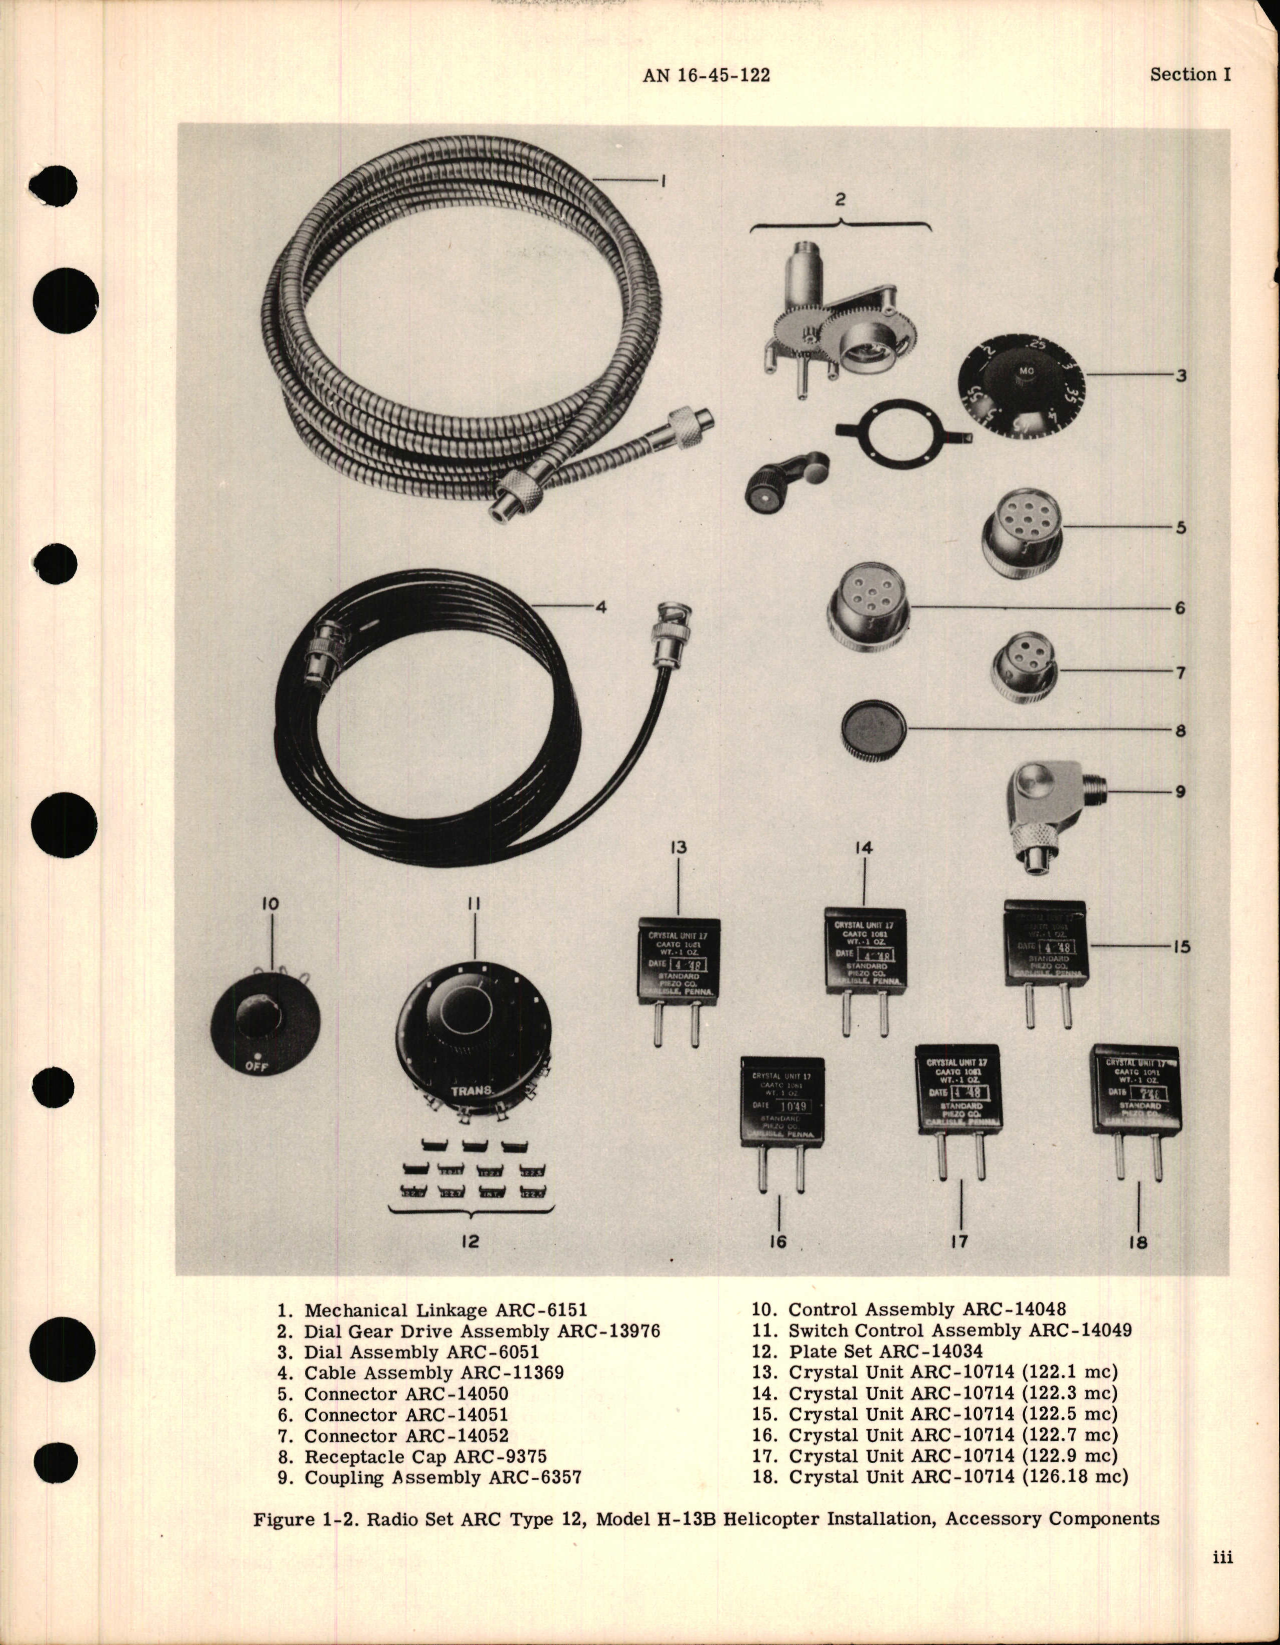 Sample page 7 from AirCorps Library document: Maintenance Instructions for Radio Set ARC Type 12